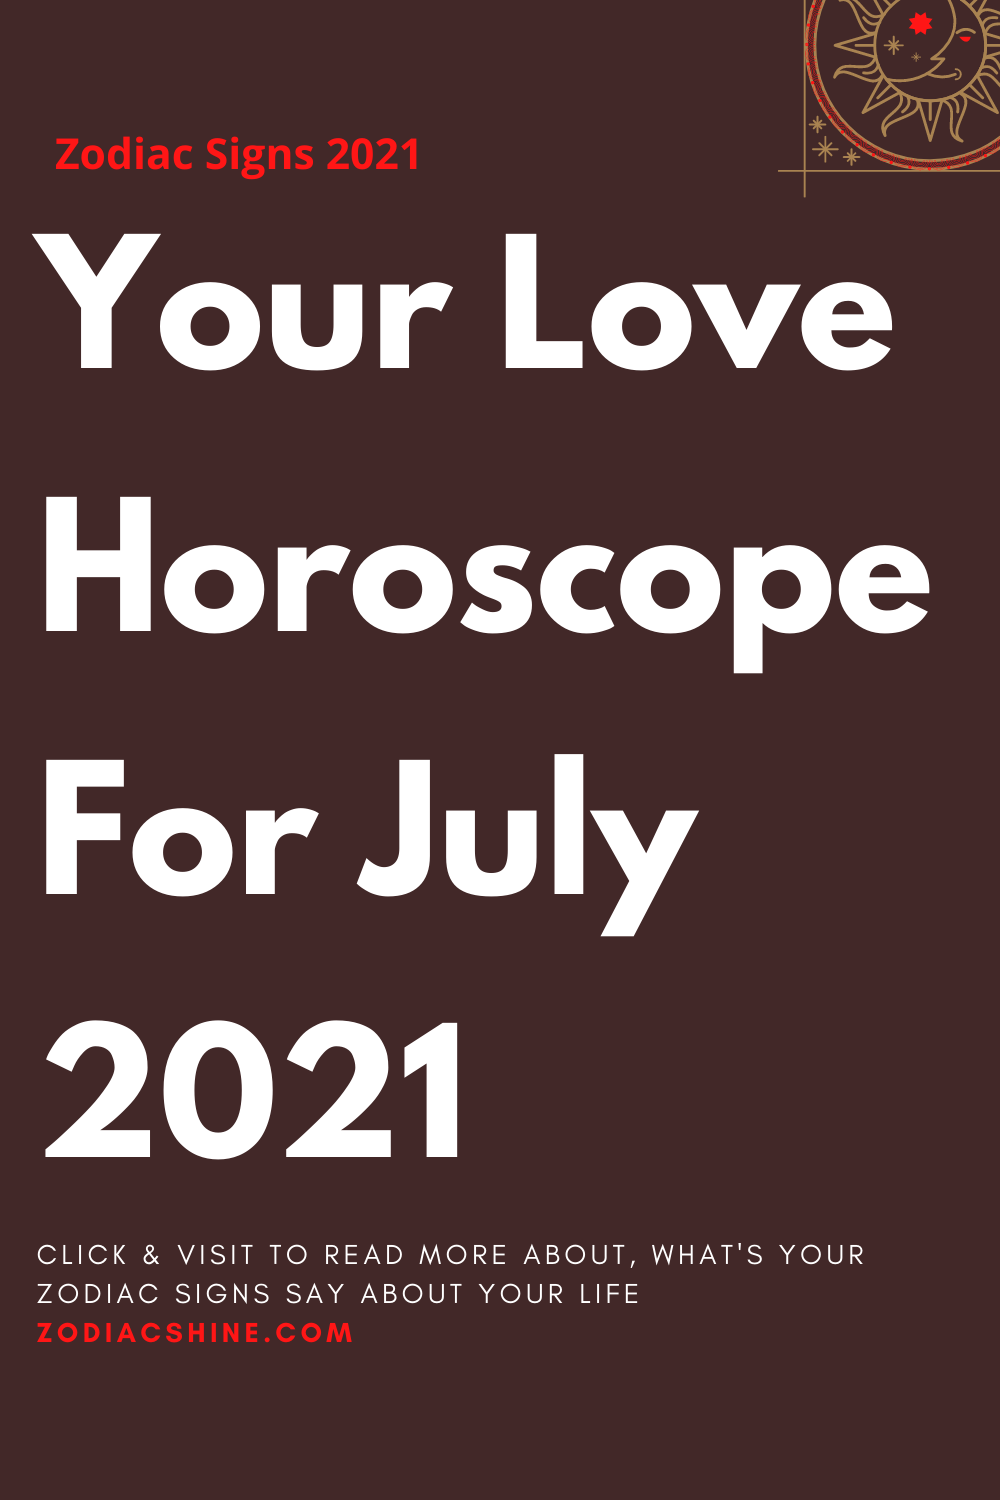 Your Love Horoscope For July 2021